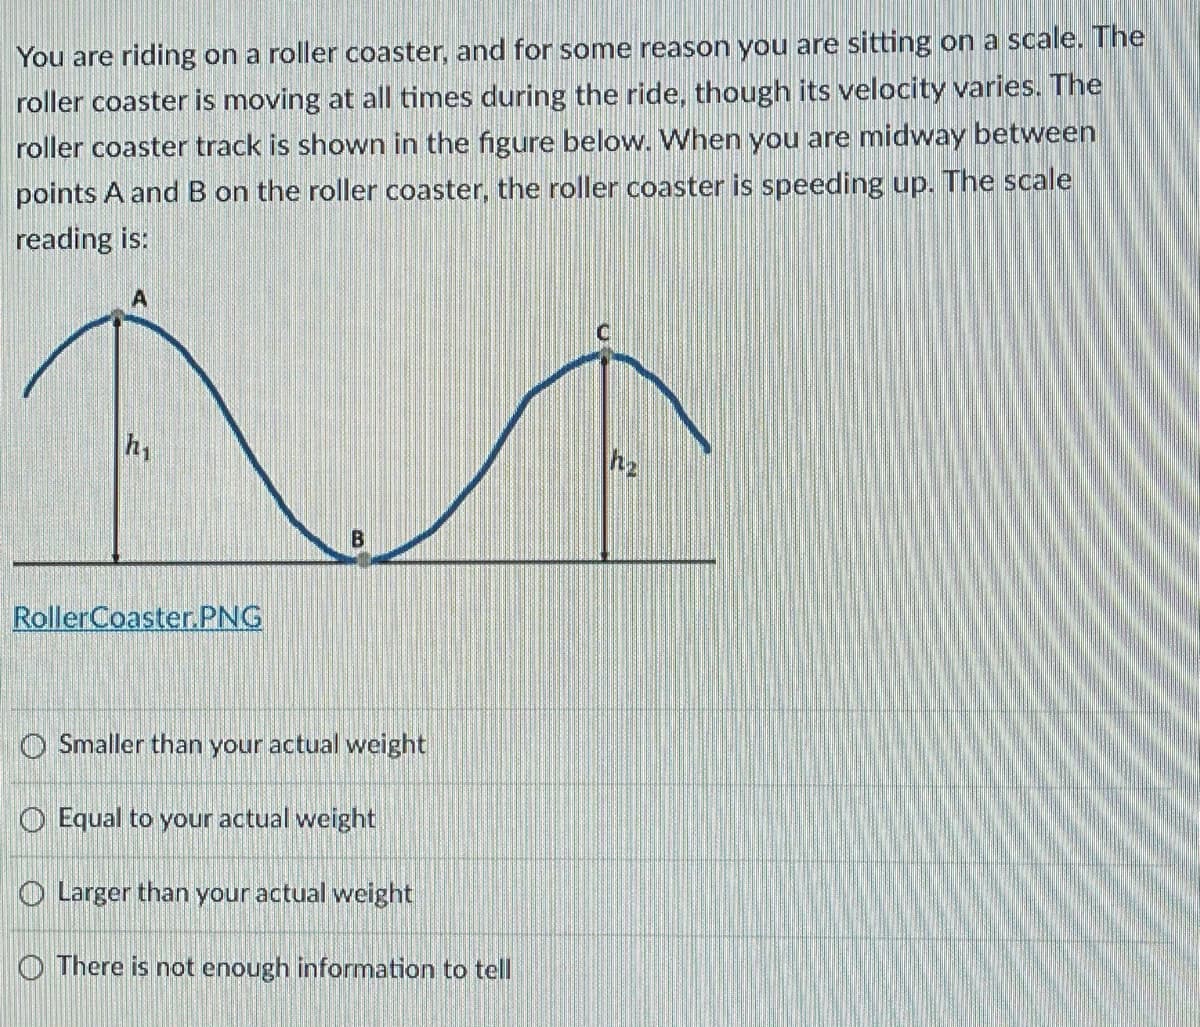 You are riding on a roller coaster, and for some reason you are sitting on a scale. The
roller coaster is moving at all times during the ride, though its velocity varies. The
roller coaster track is shown in the figure below. When you are midway between
points A and B on the roller coaster, the roller coaster is speeding up. The scale
reading is:
RollerCoaster. PNG
O Smaller than your actual weight
O Equal to your actual weight
O Larger than your actual weight
O There is not enough information to tell
